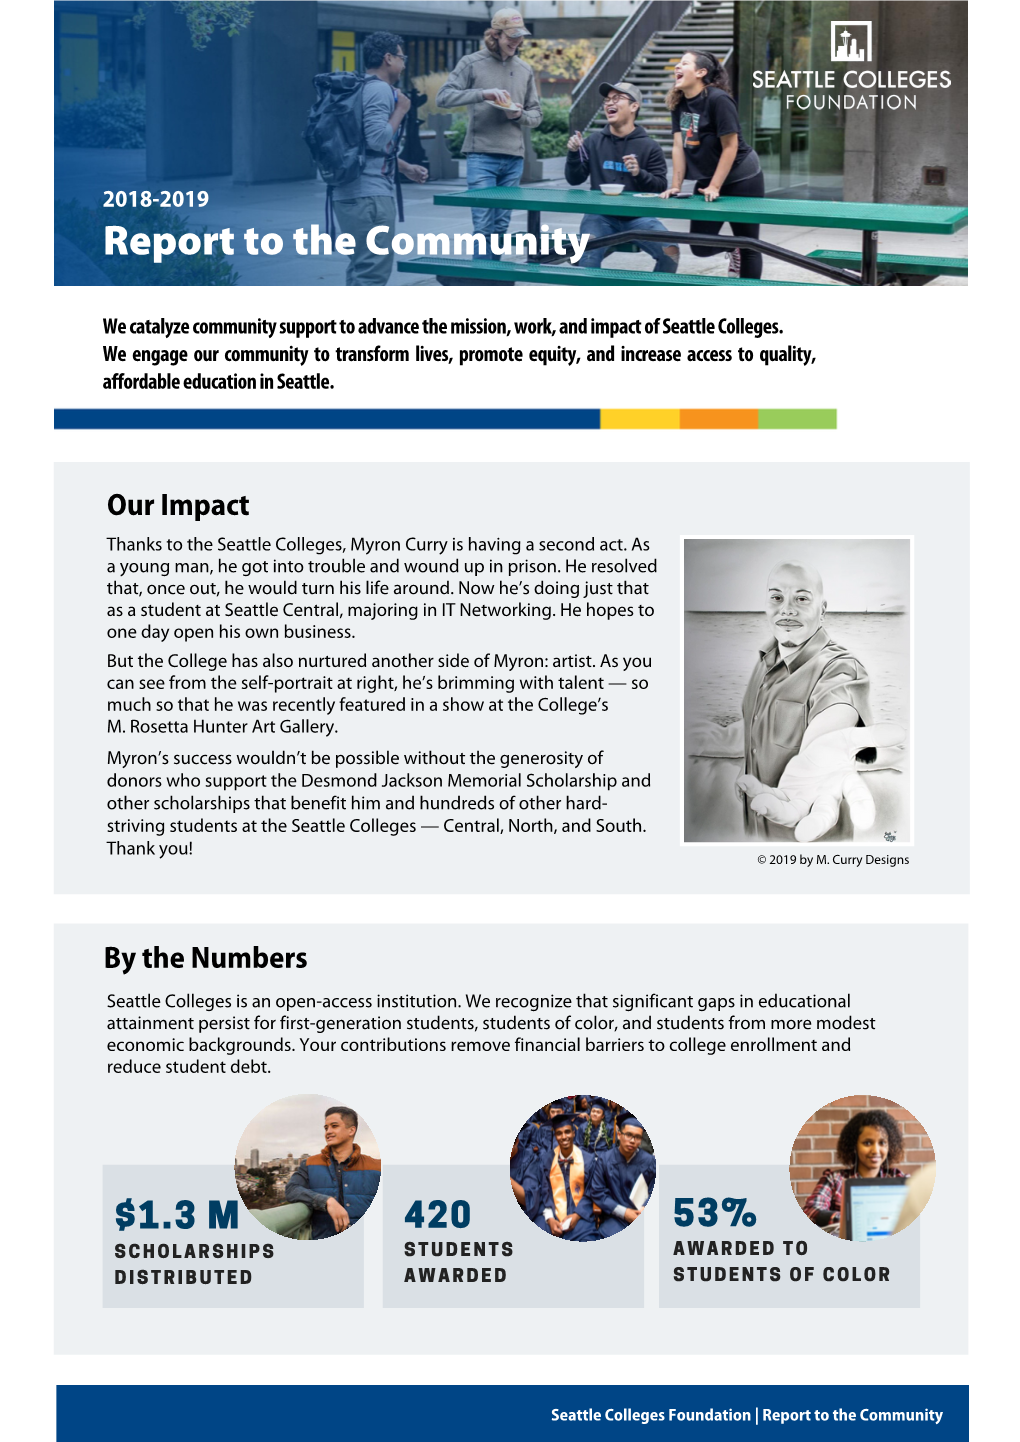 Seattle Colleges Foundation Report to Community 18-19